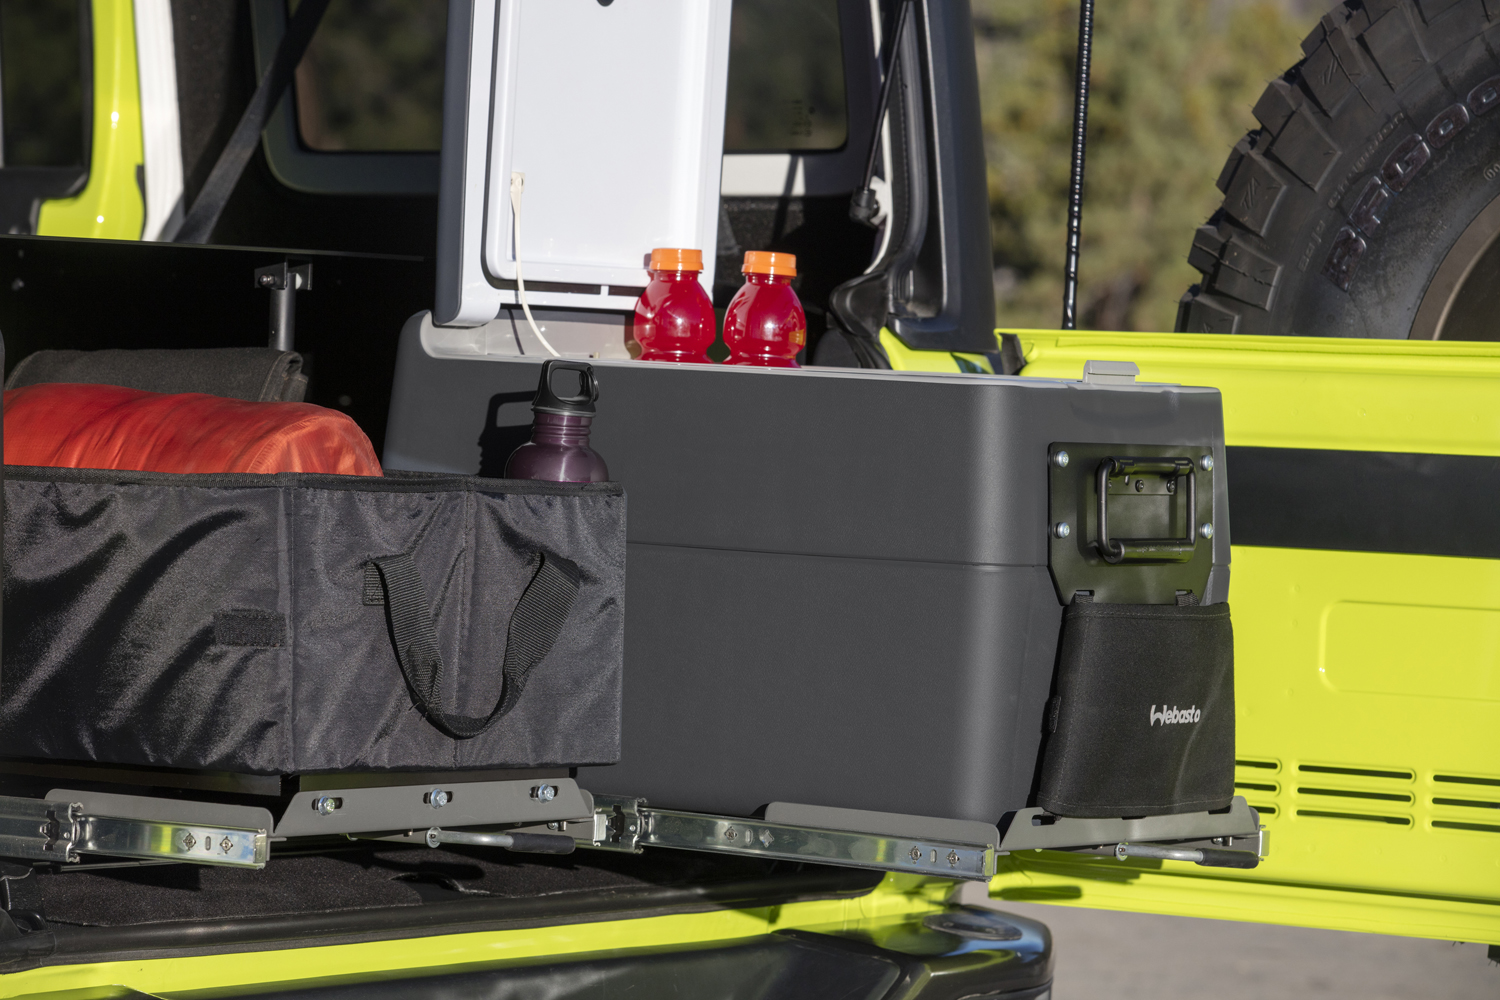 Webasto makes loading and unloading the Jeep Wrangler easy and hassle free with its new Dual Cargo Slides.